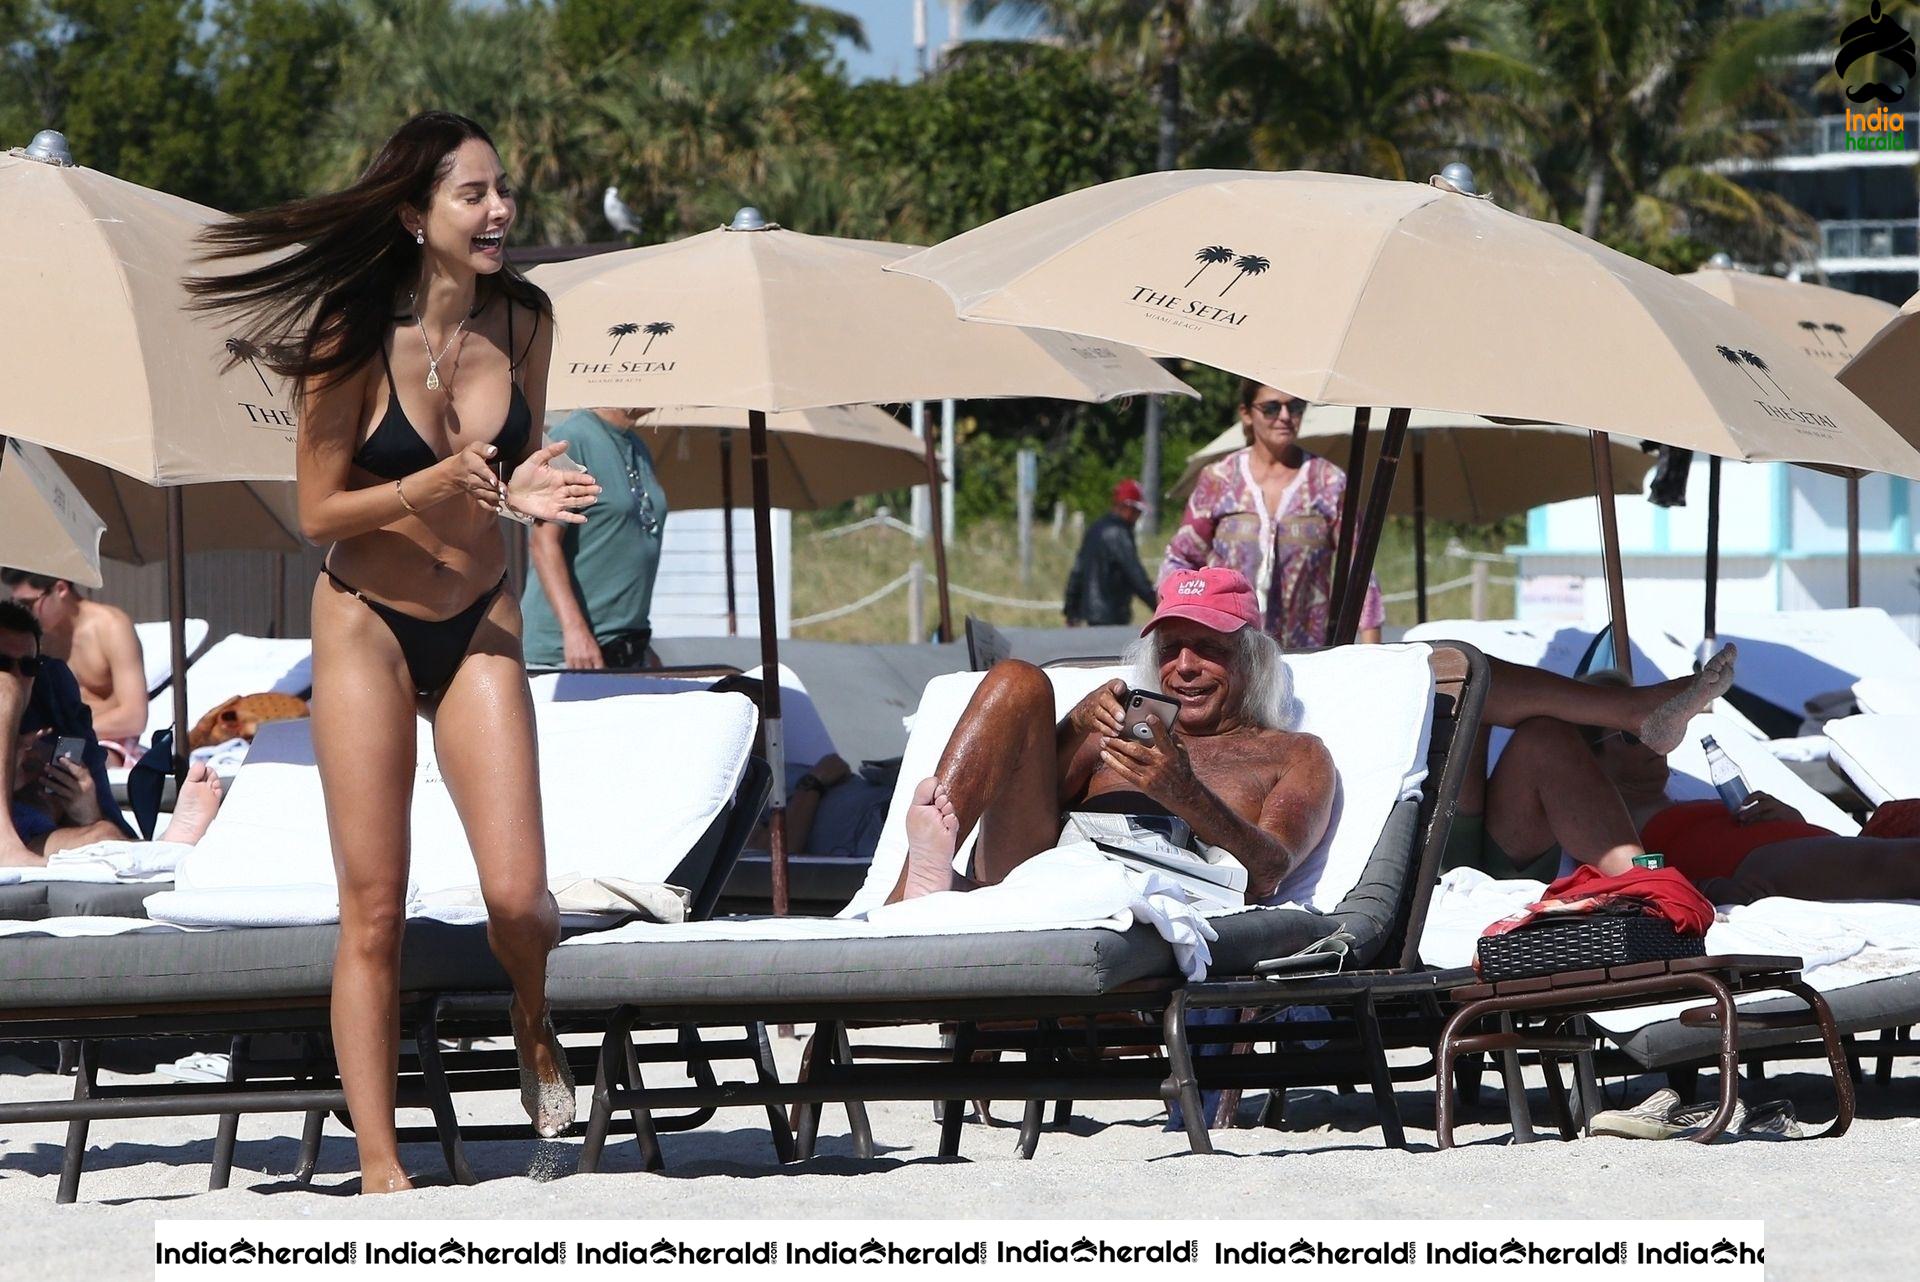 Patricia Contreras takes a quick dip in the water while at the beach in Miami